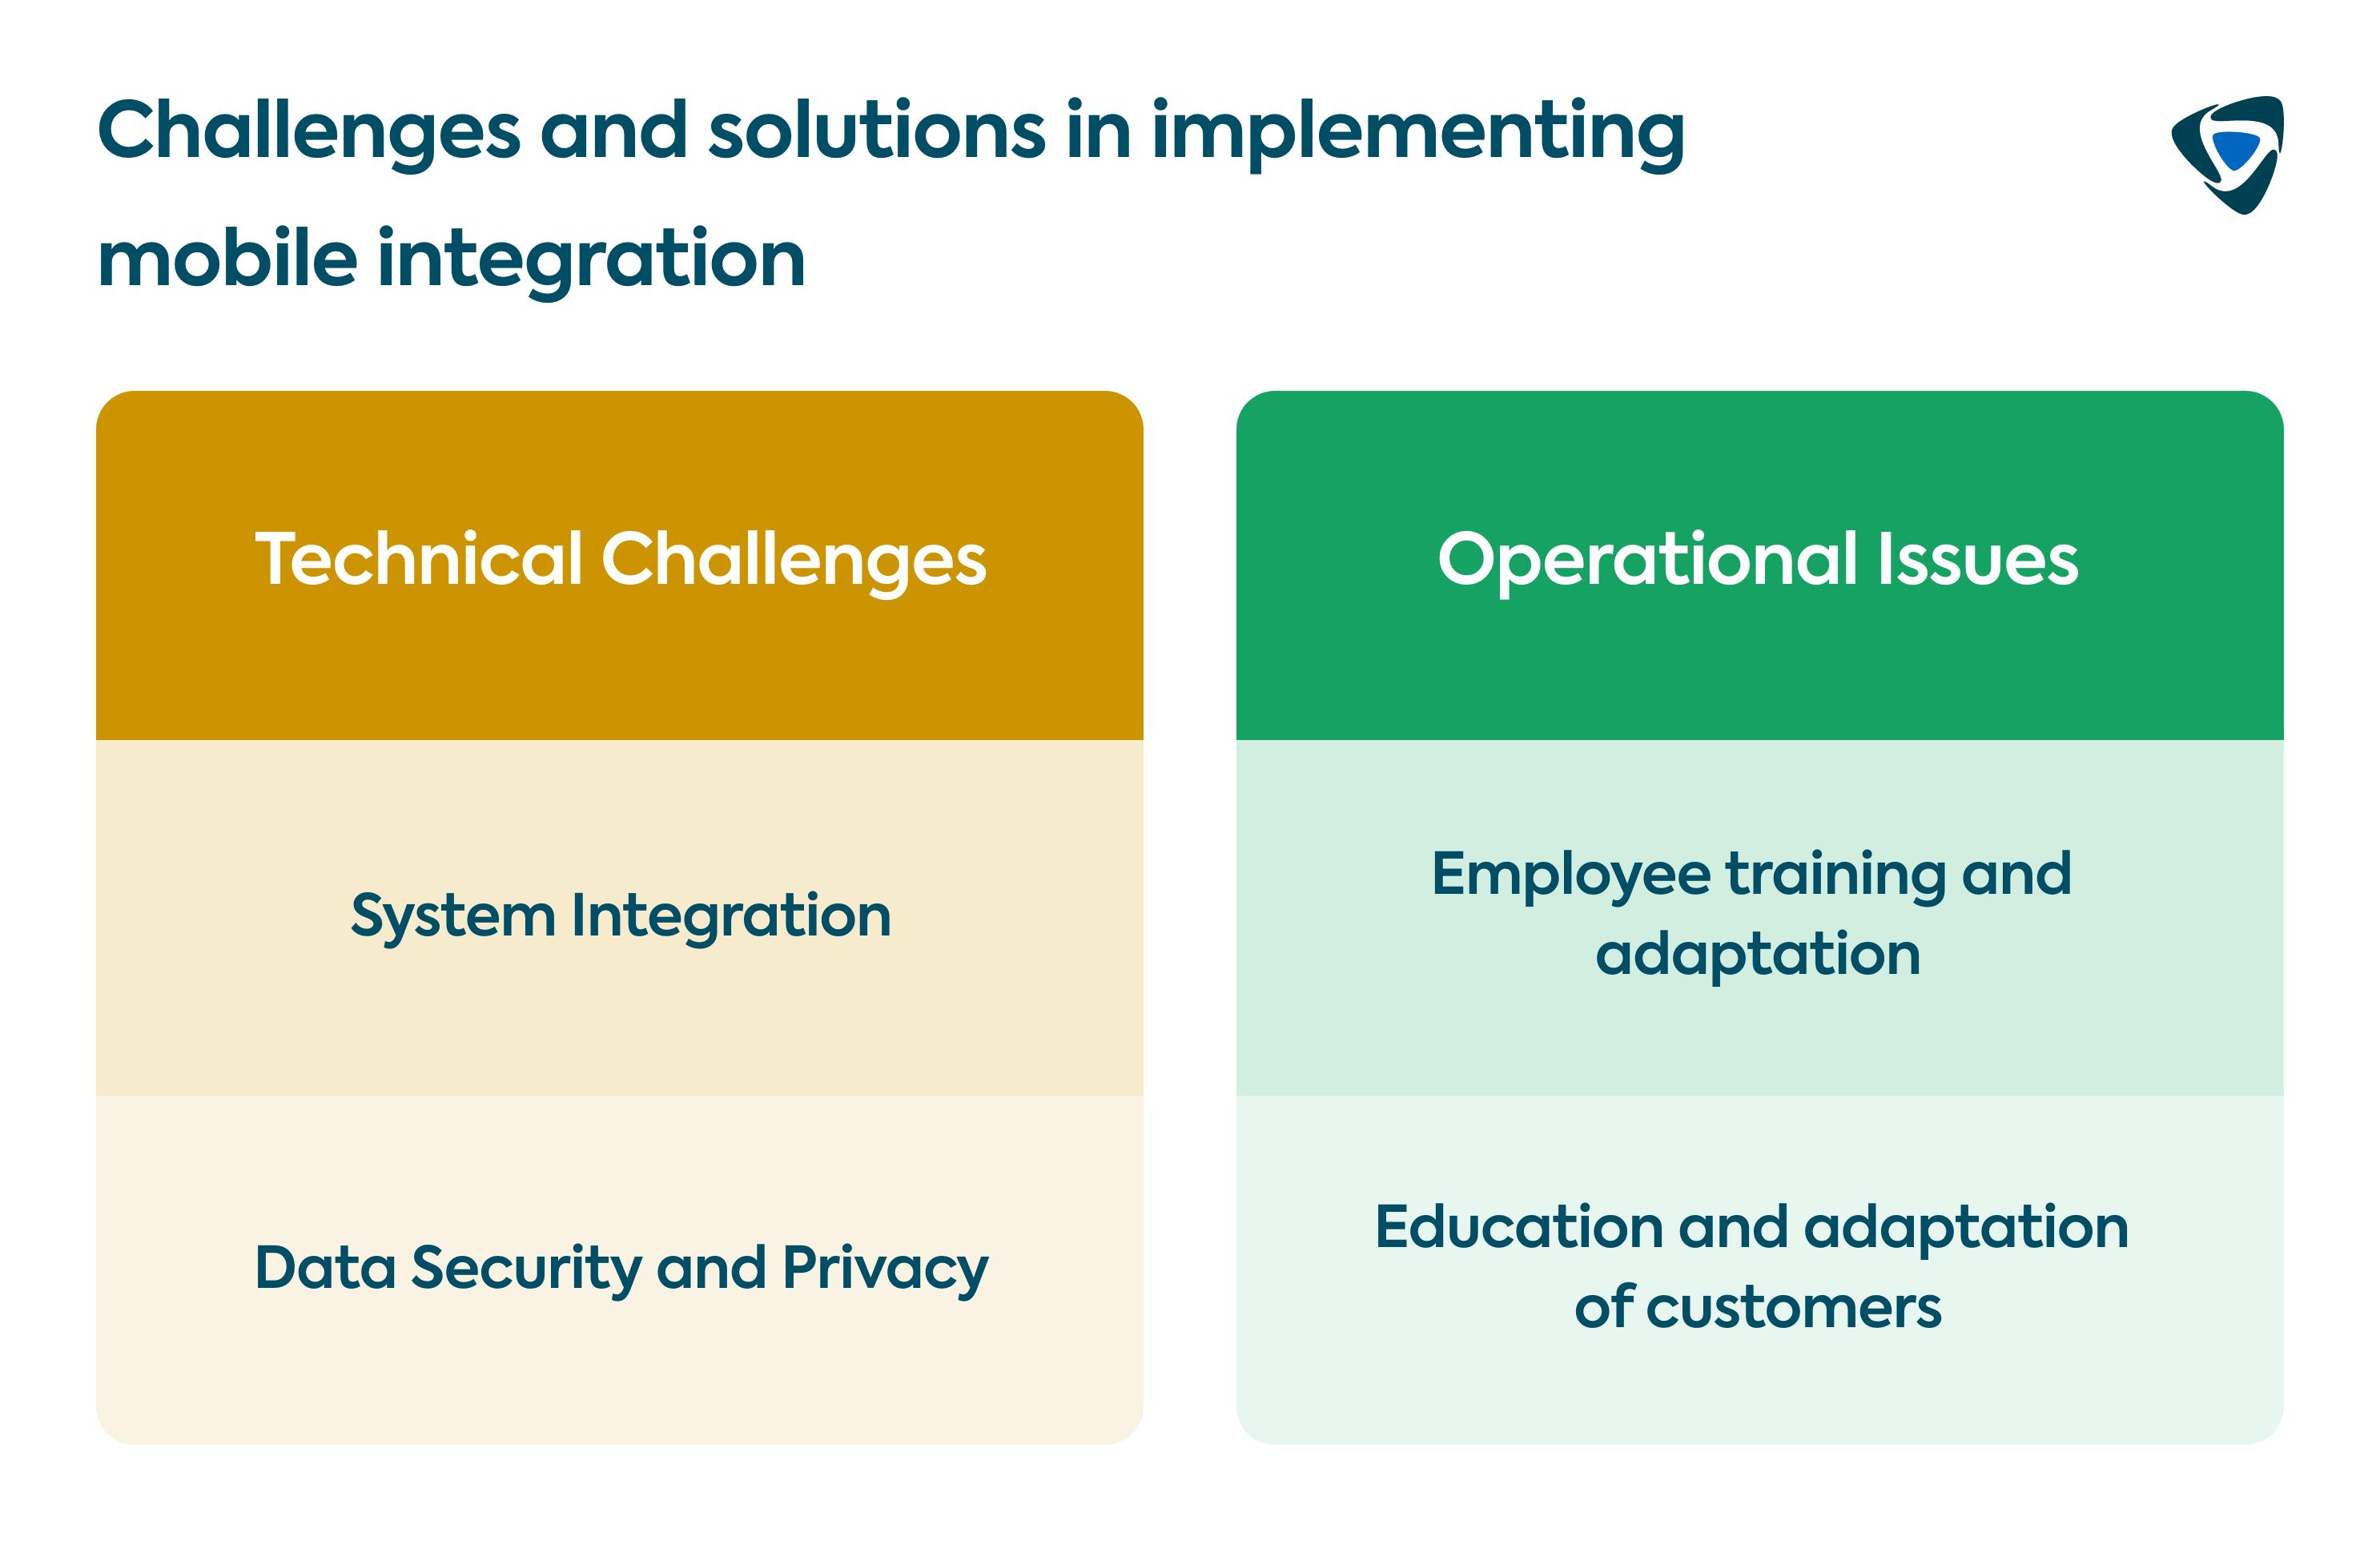 Challenges and solutions in implementing mobile integration